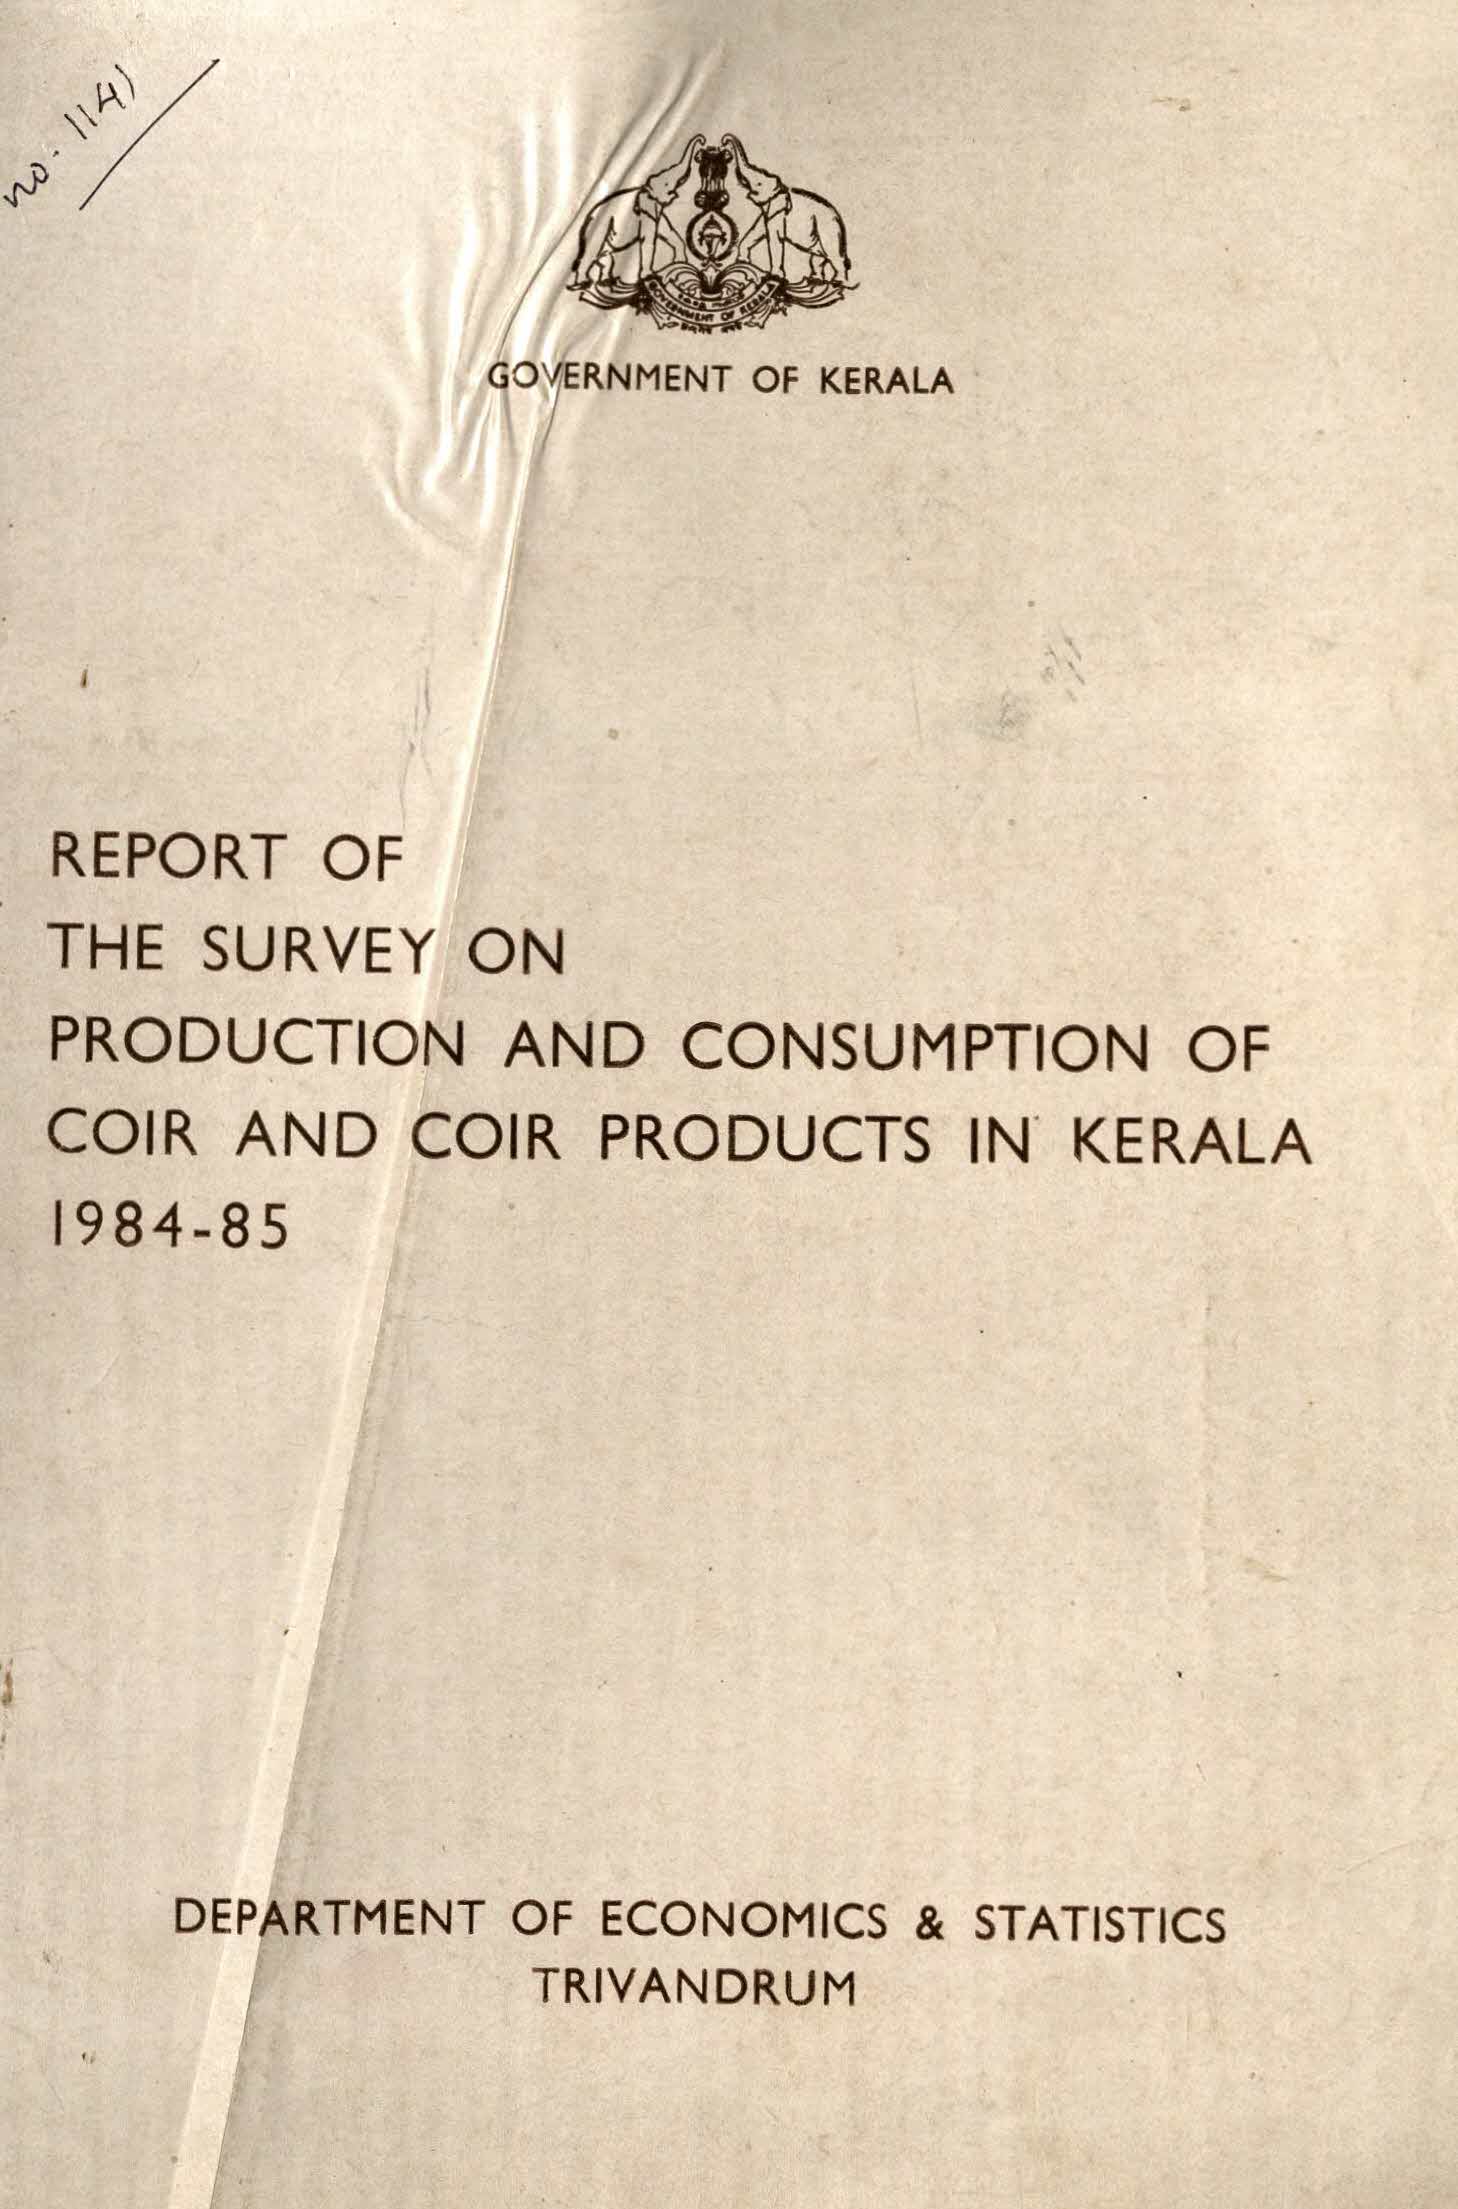 Report Of The Survey On Production And Consumption Of Coir And Coir Products In Kerala